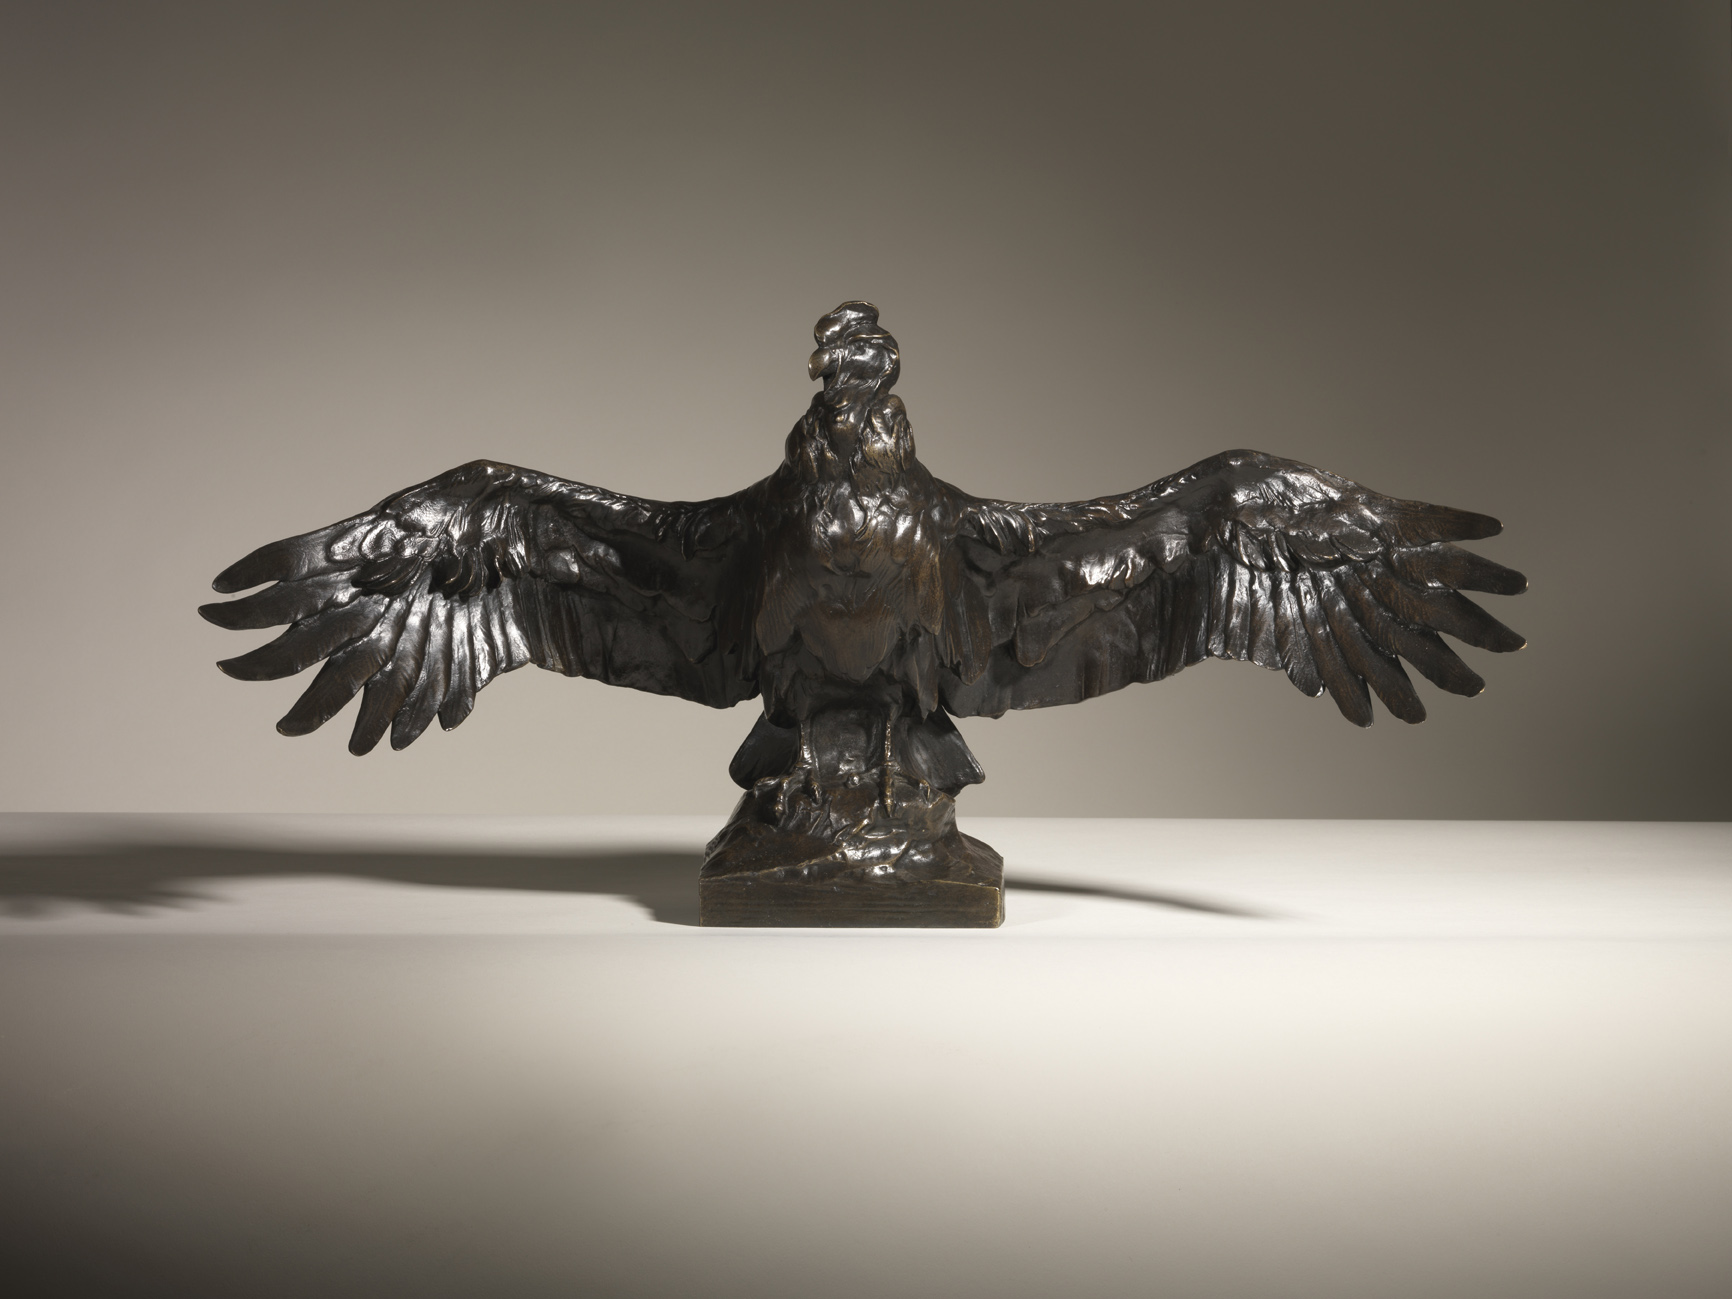 Condor, Wings Outstretched, c. 1907